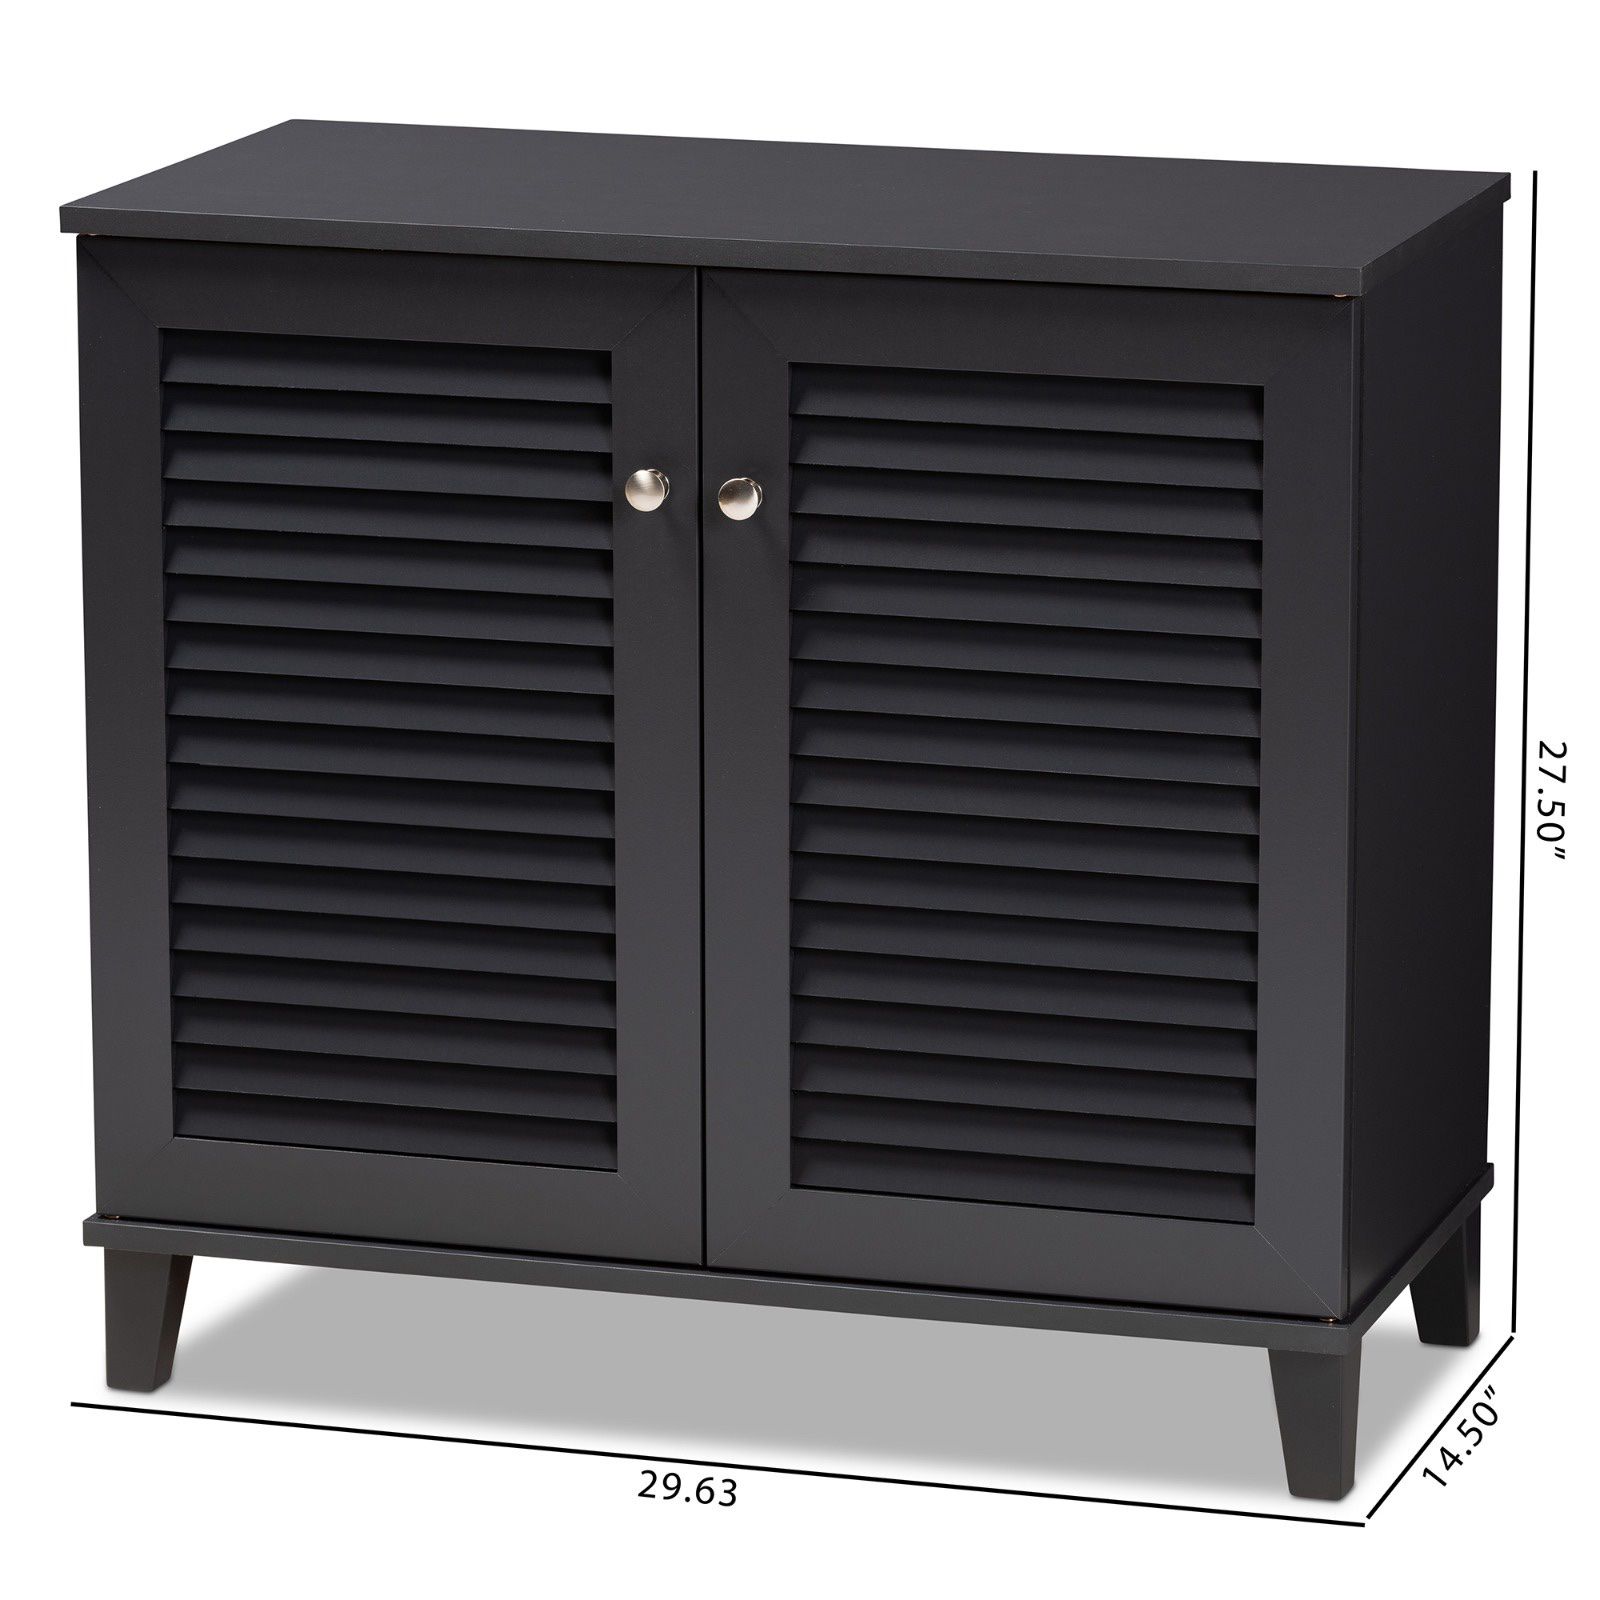 Baxton Studio Coolidge Modern Dark Grey 4-Shelf Shoe Cabinet DESCRIPTION: Store your shoes on the sly with the Coolidge shoe cabinet. Two slatted door